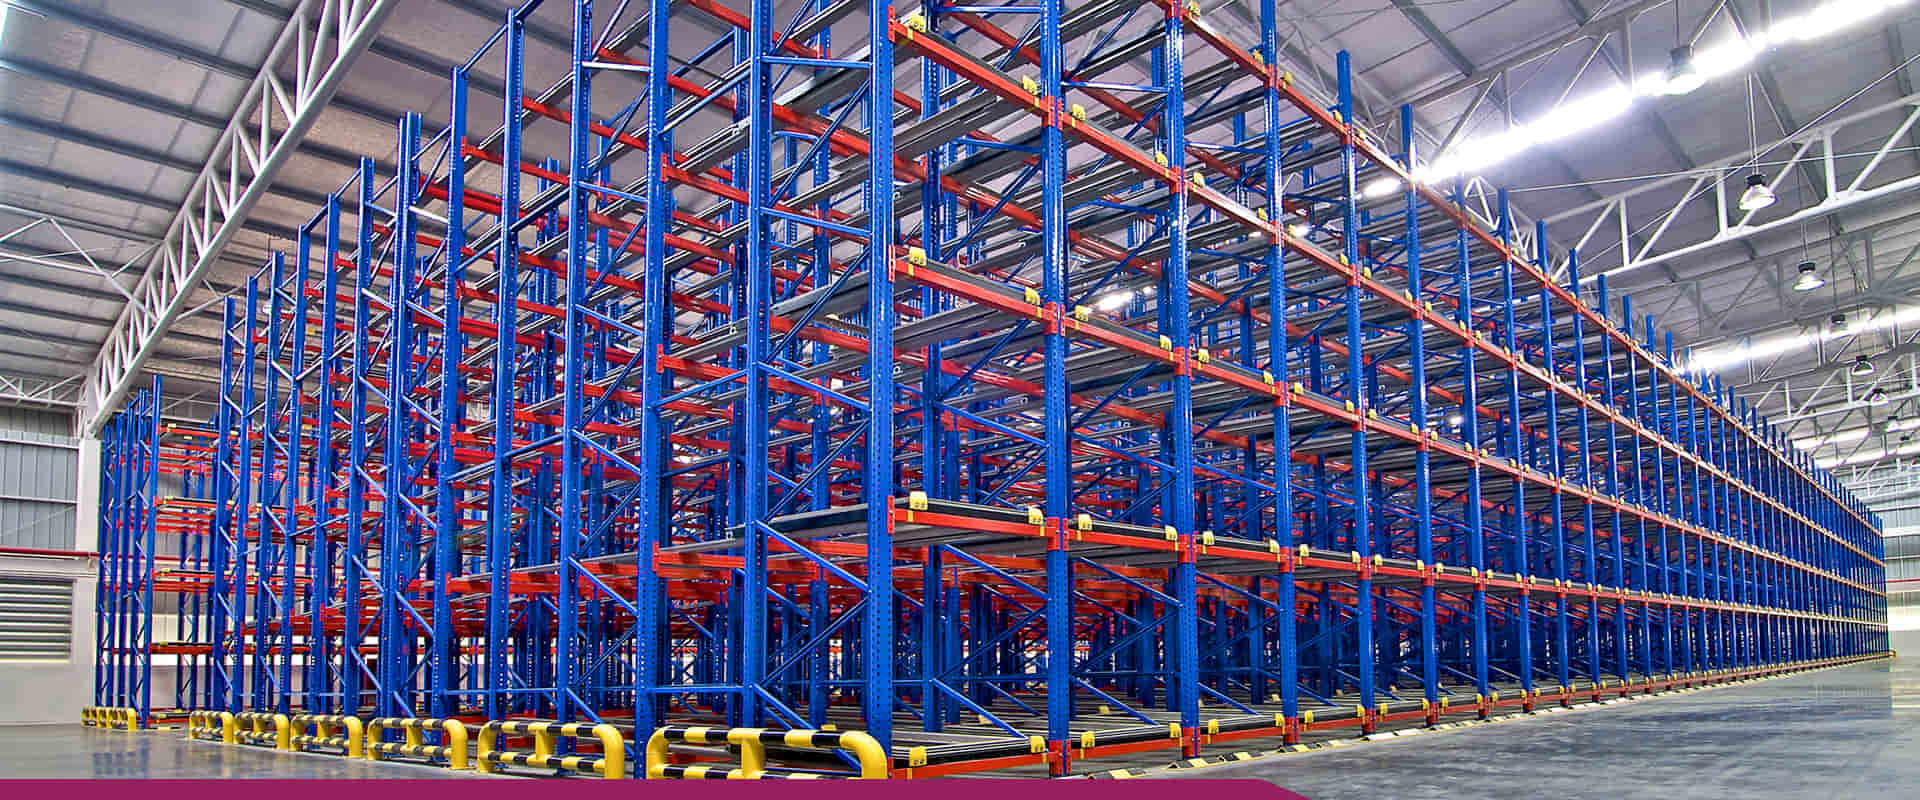 India’s Top Warehouse And Industrial Storage Racks Manufacturer In Alwar